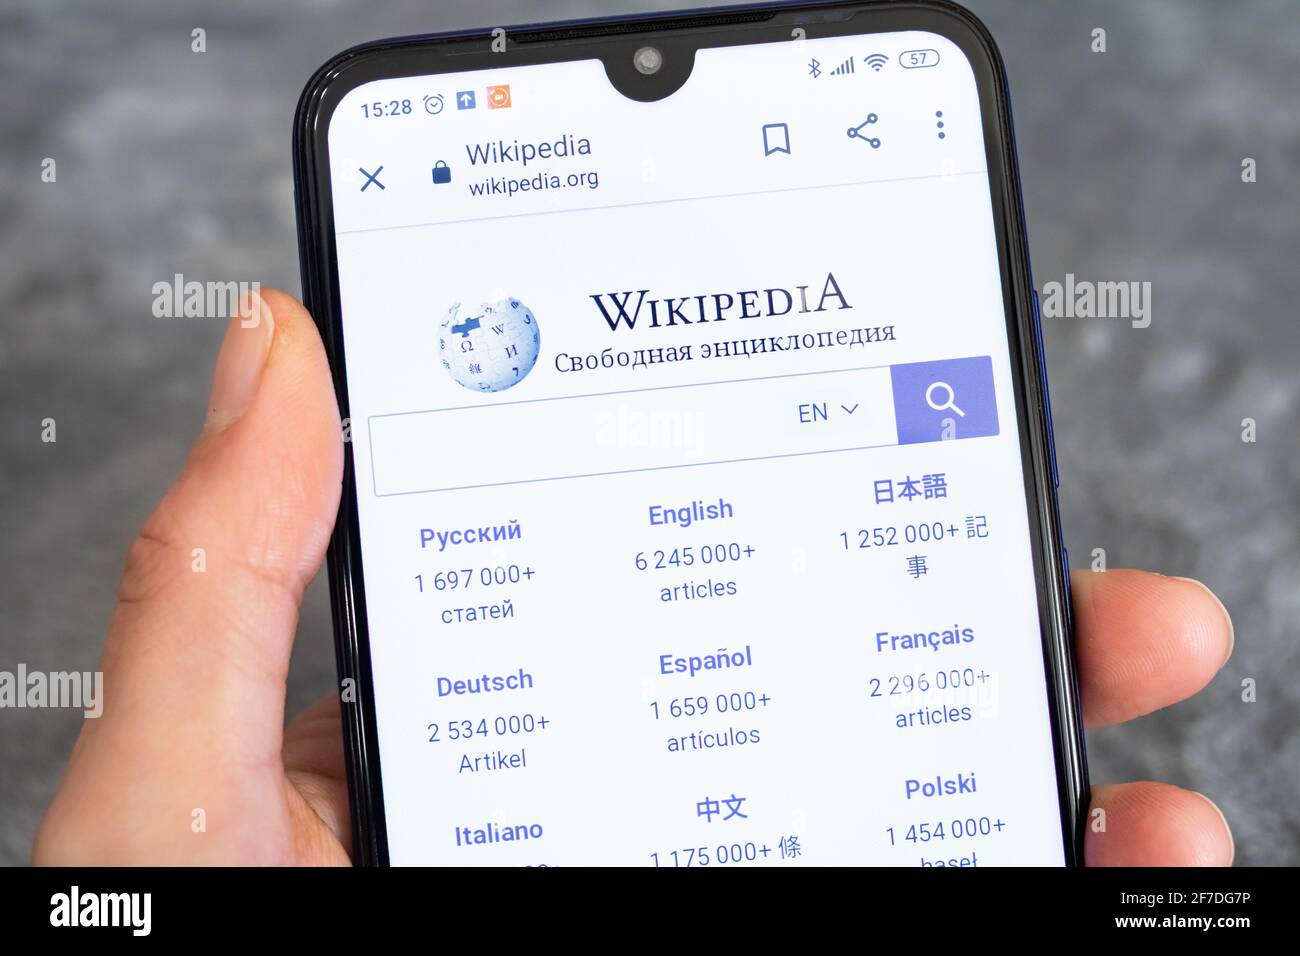 NOVOPOLOTSK, BELARUS - 06 FEBRUARY, 2021: Phone in hand and wikipedia logo on display close up Stock Photo